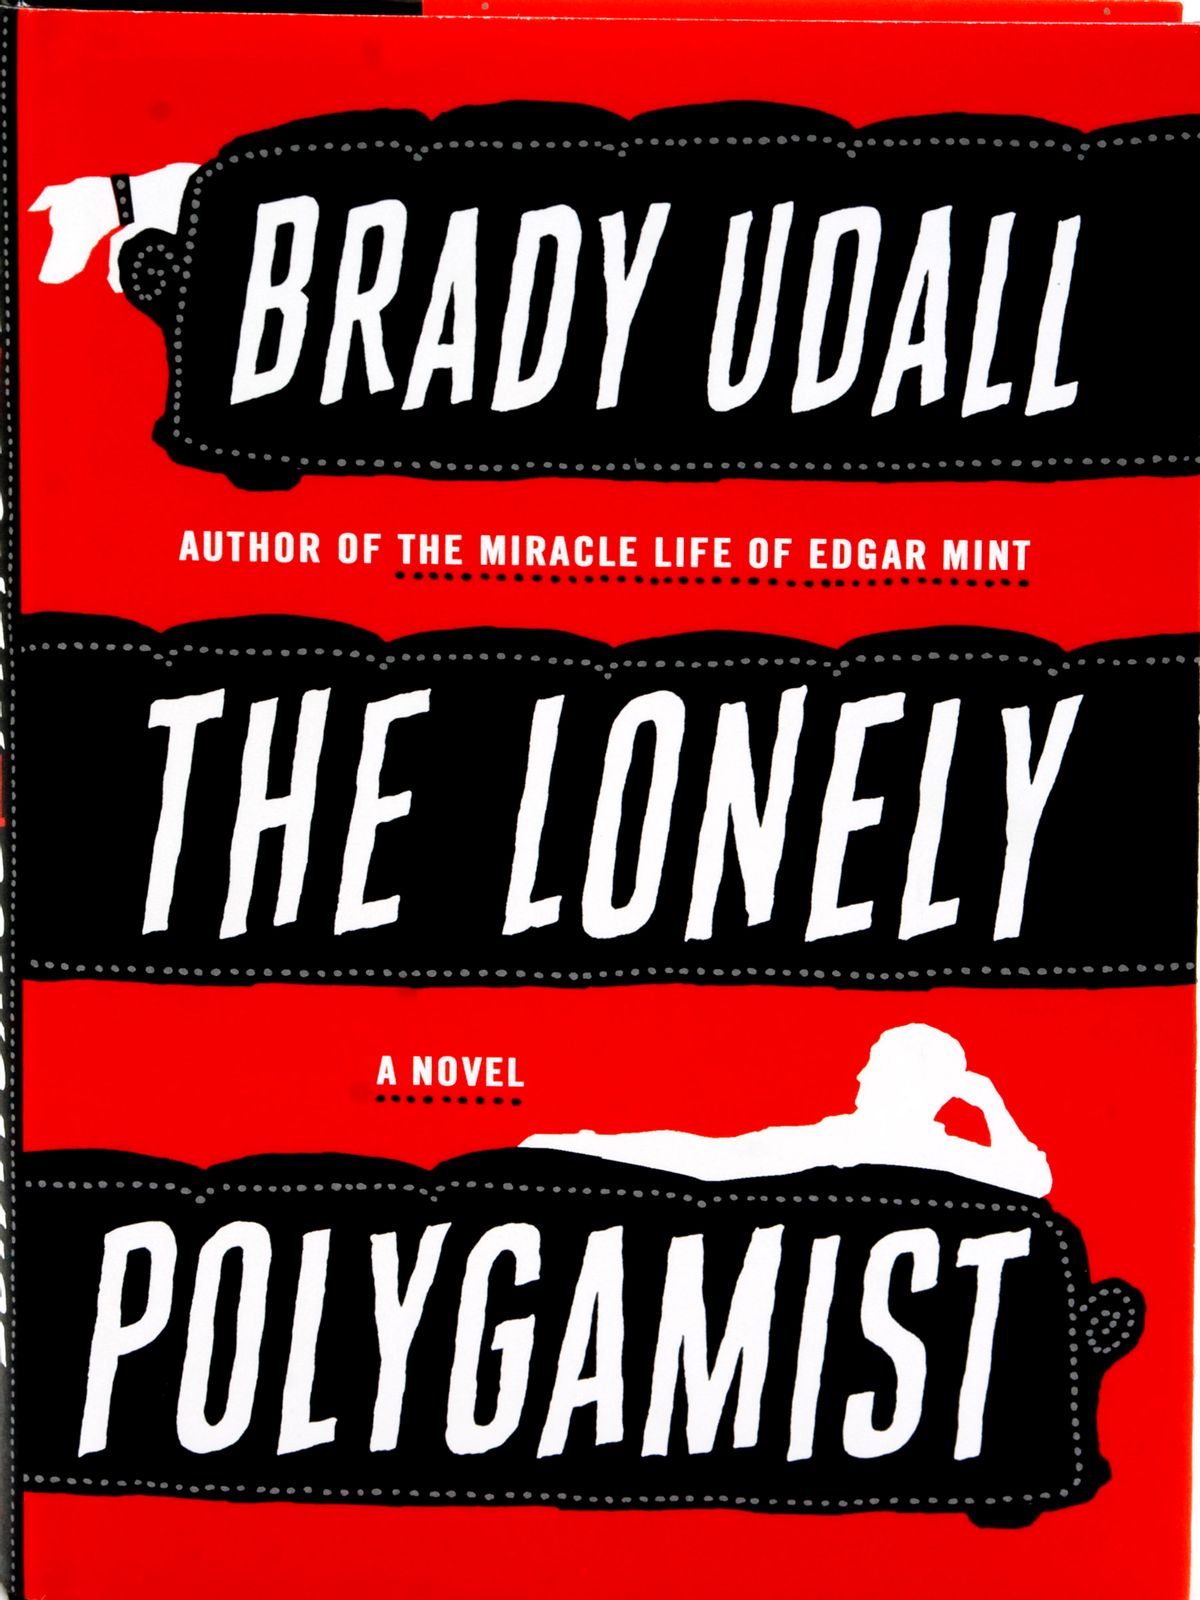 "The Lonely Polygamist," by Brady Udall  (Unknown)